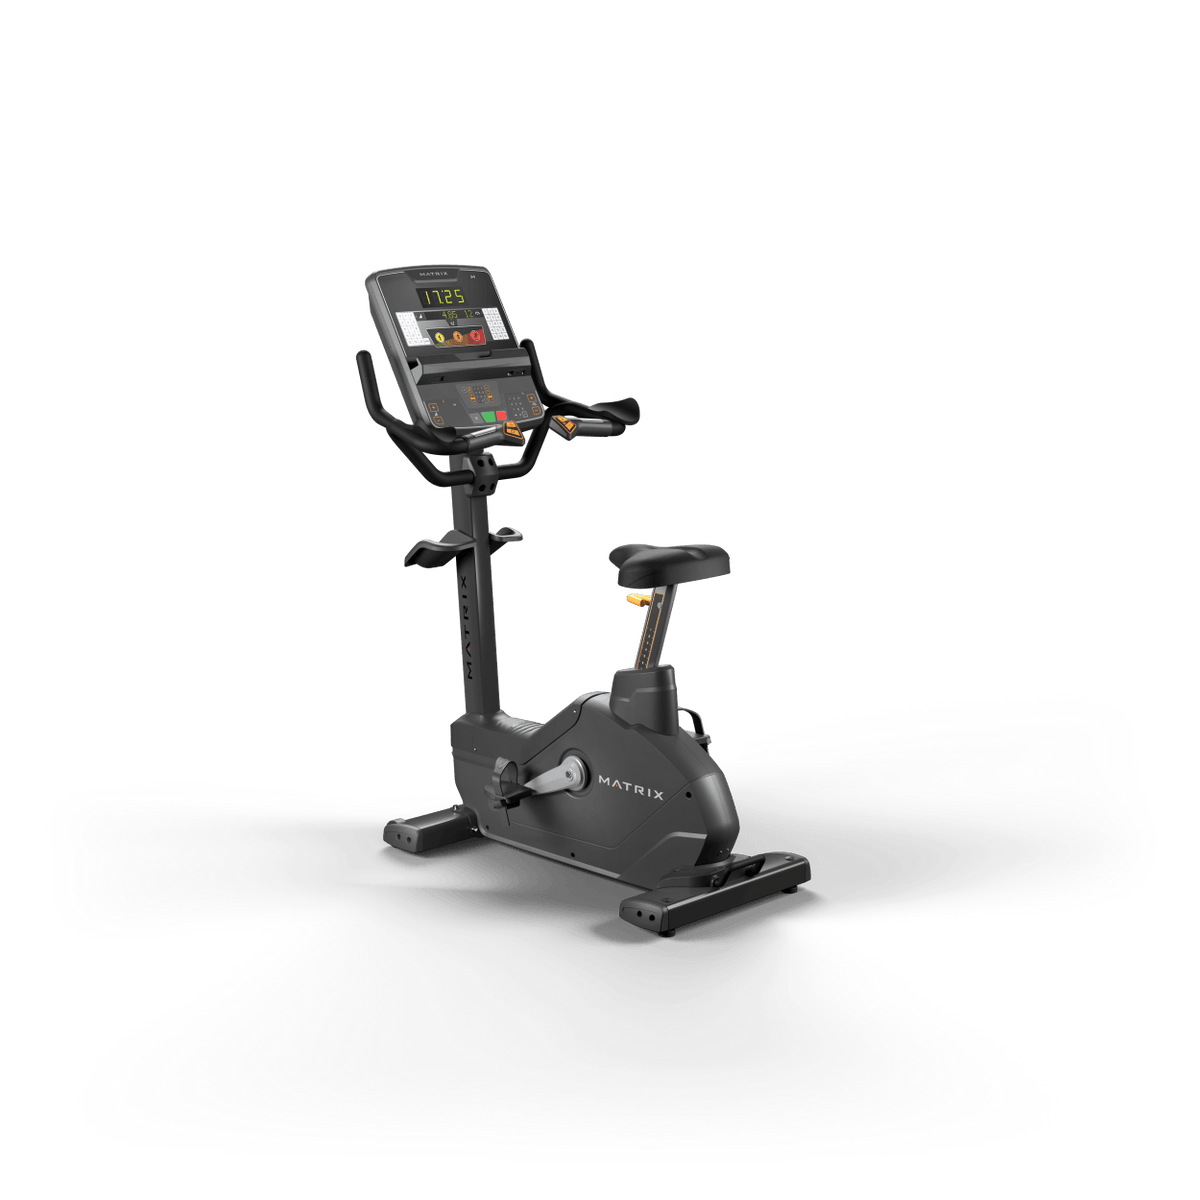 Matrix Fitness Endurance Upright Cycle with Group Training Console full view | Fitness Experience